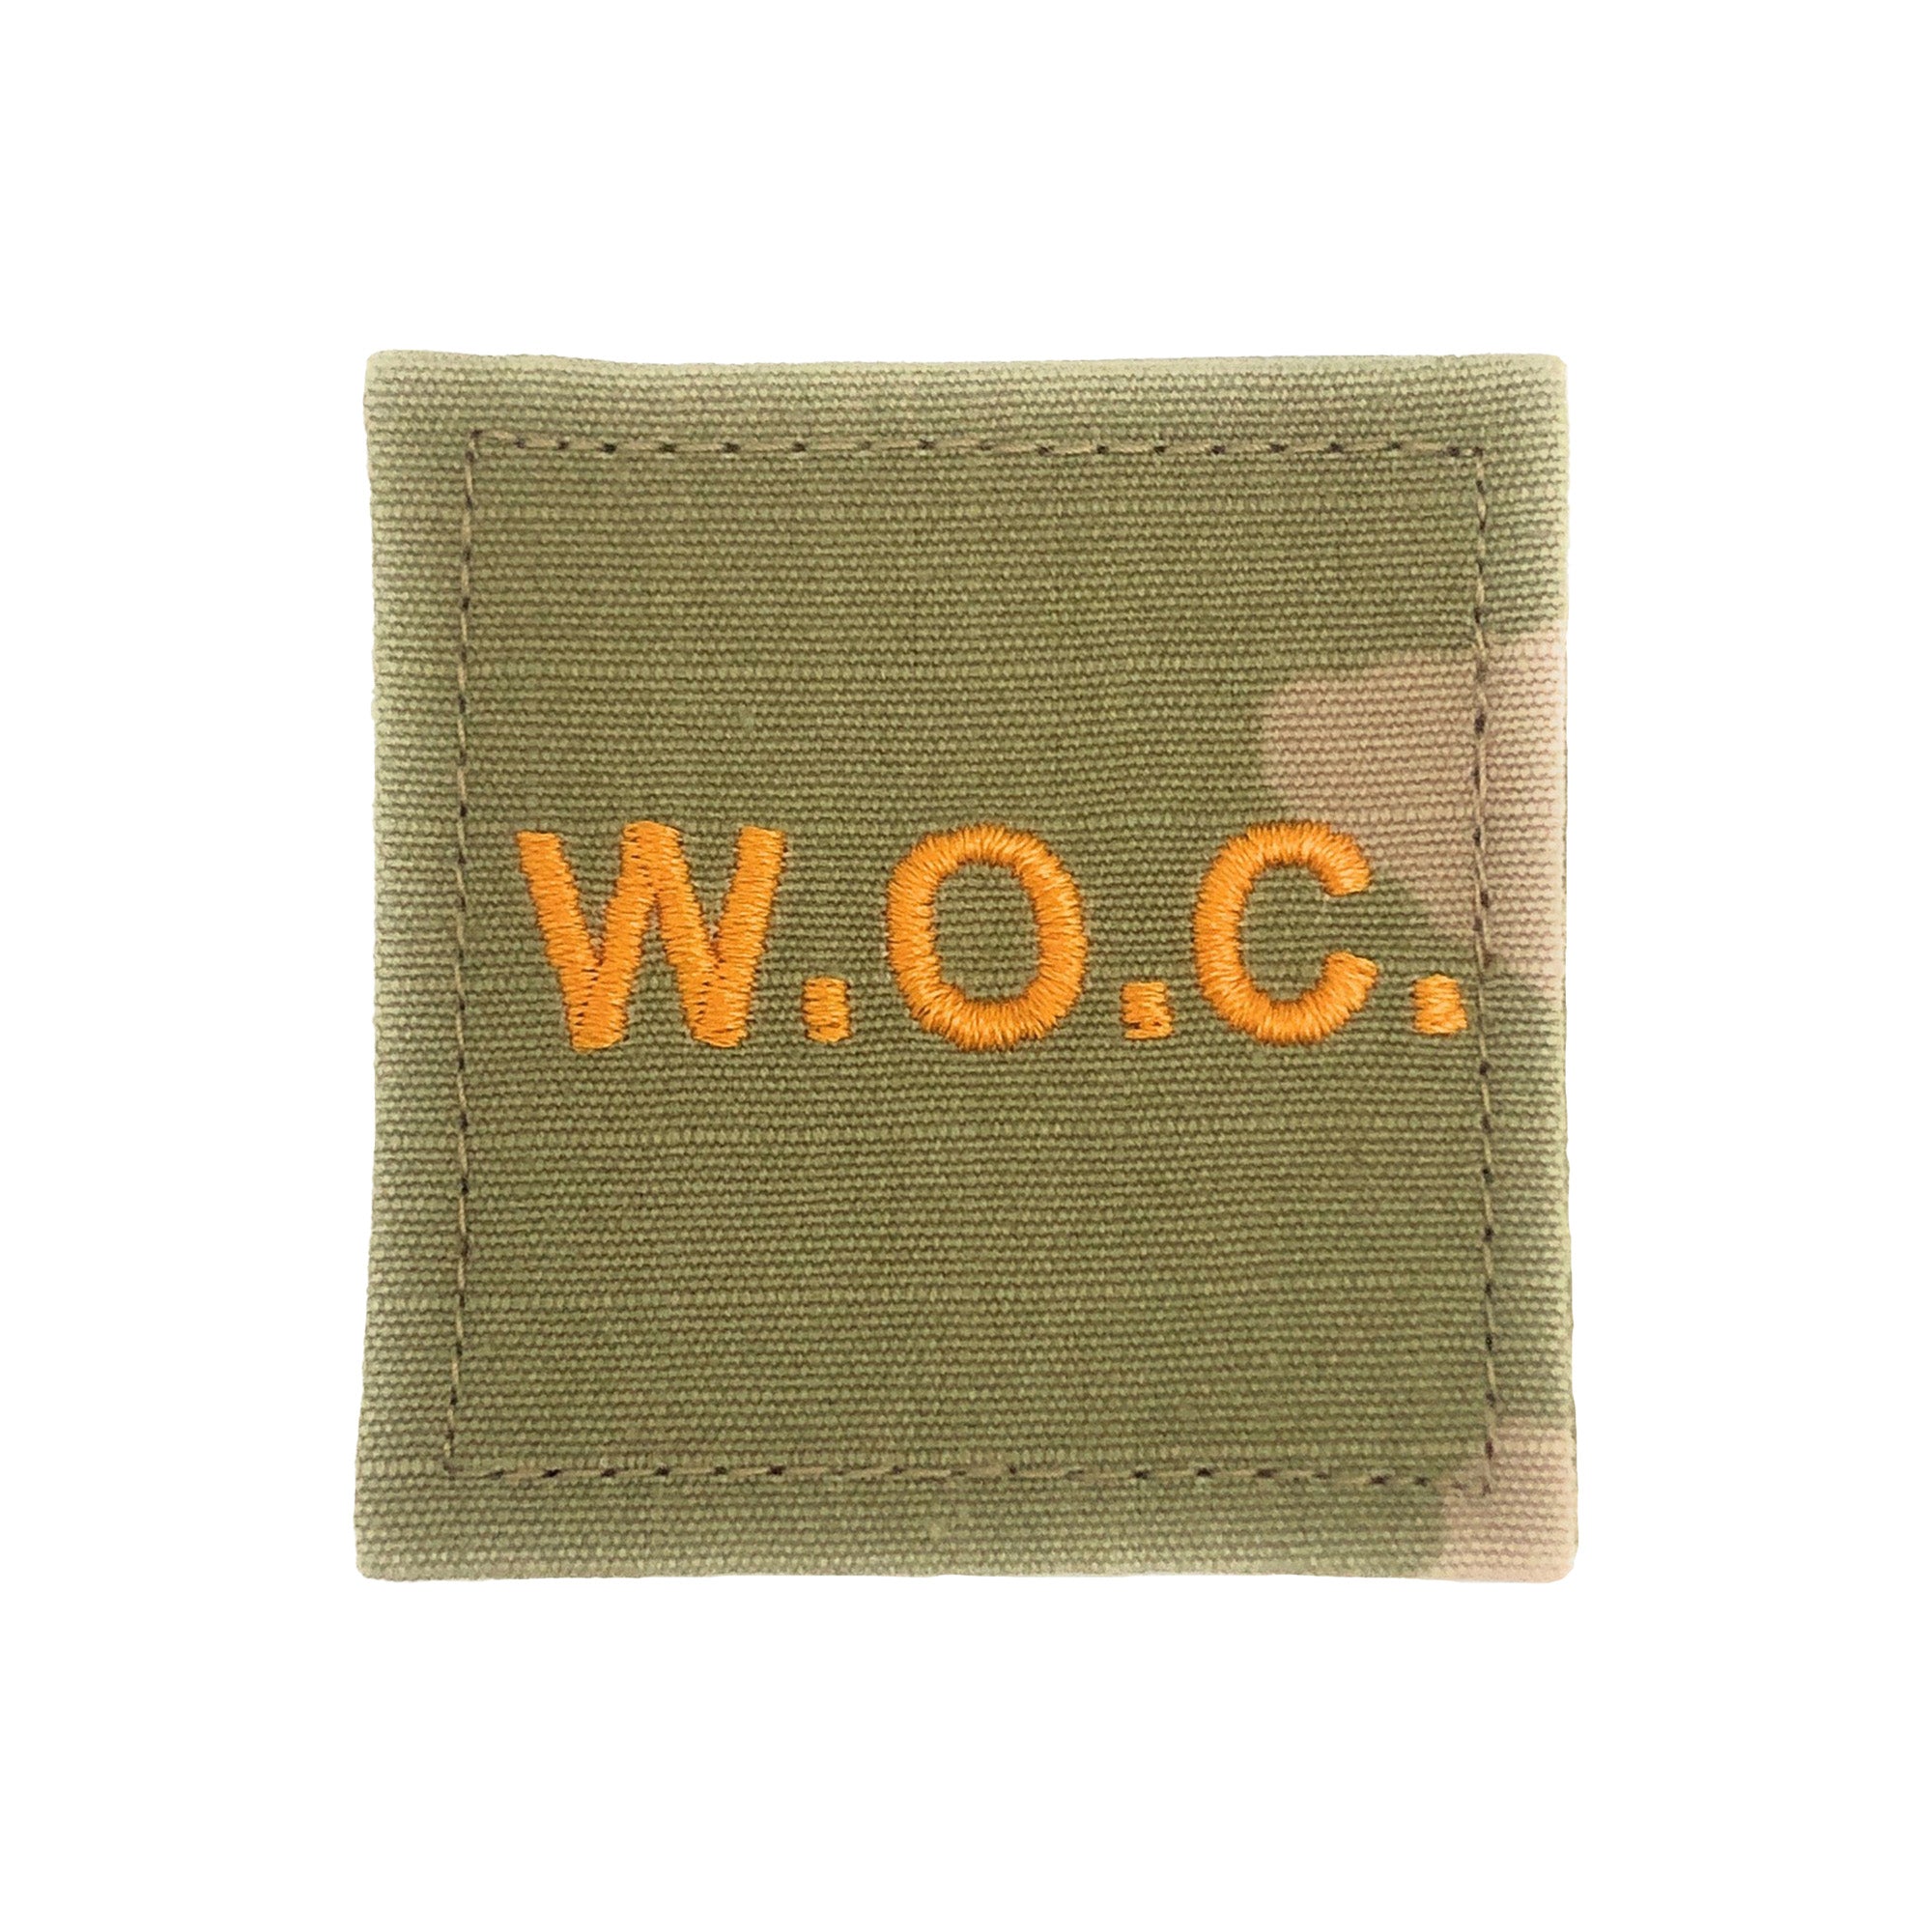 Woc Warrant Officer Candidate Gold Letters OCP Army Rank with Hook Fastener